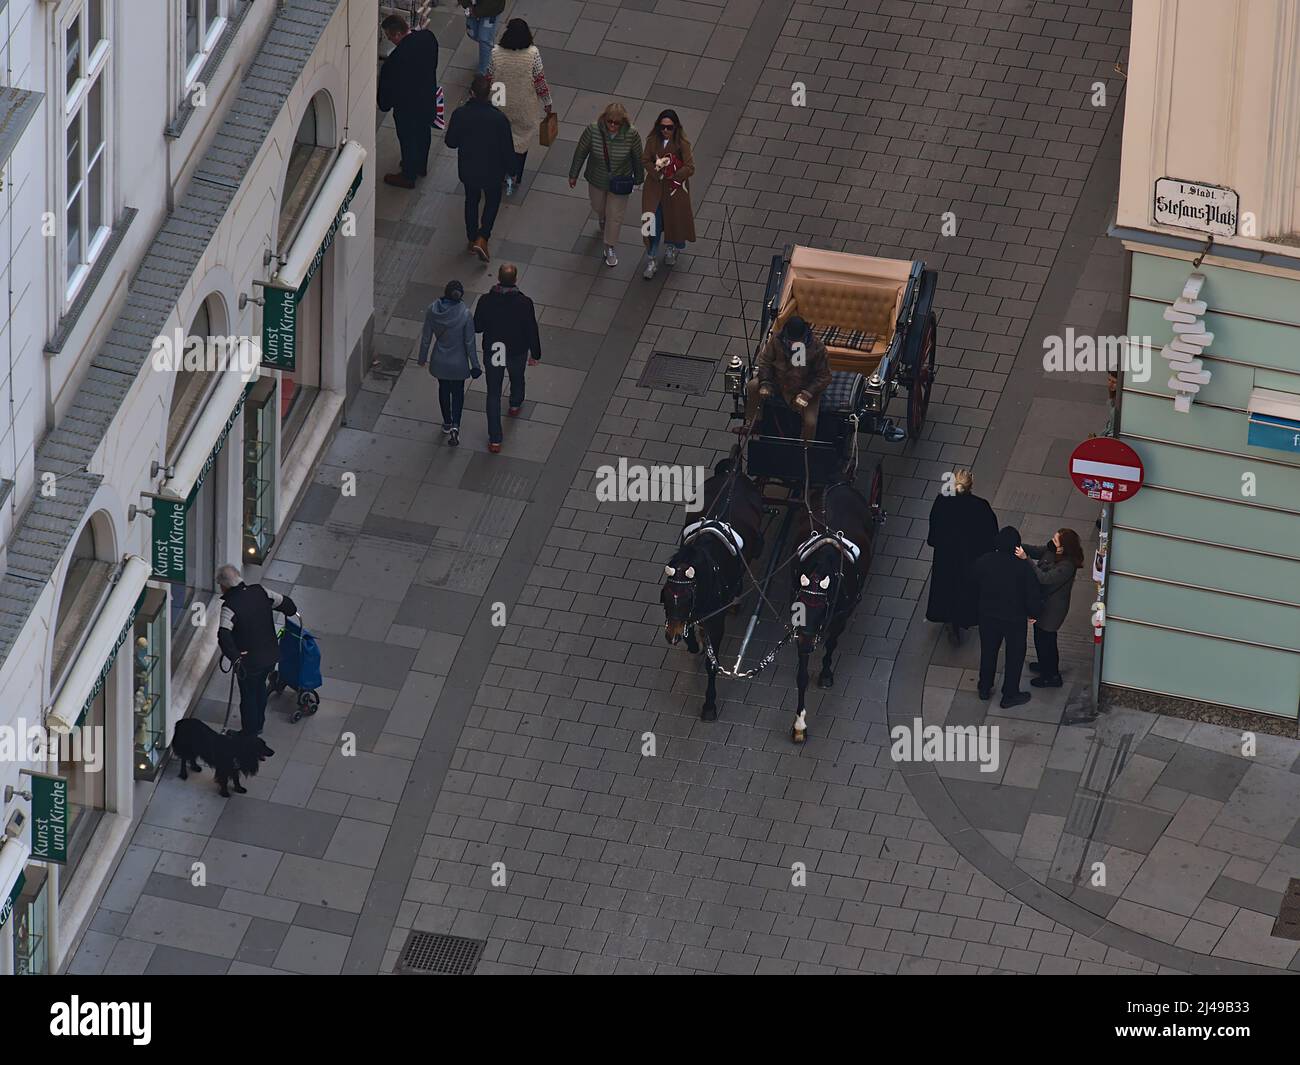 Aerial view of a fiacre, a horse-drawn four-wheeled carriage, with tourists passing people in a narrow street in the center of Vienna, Austria. Stock Photo